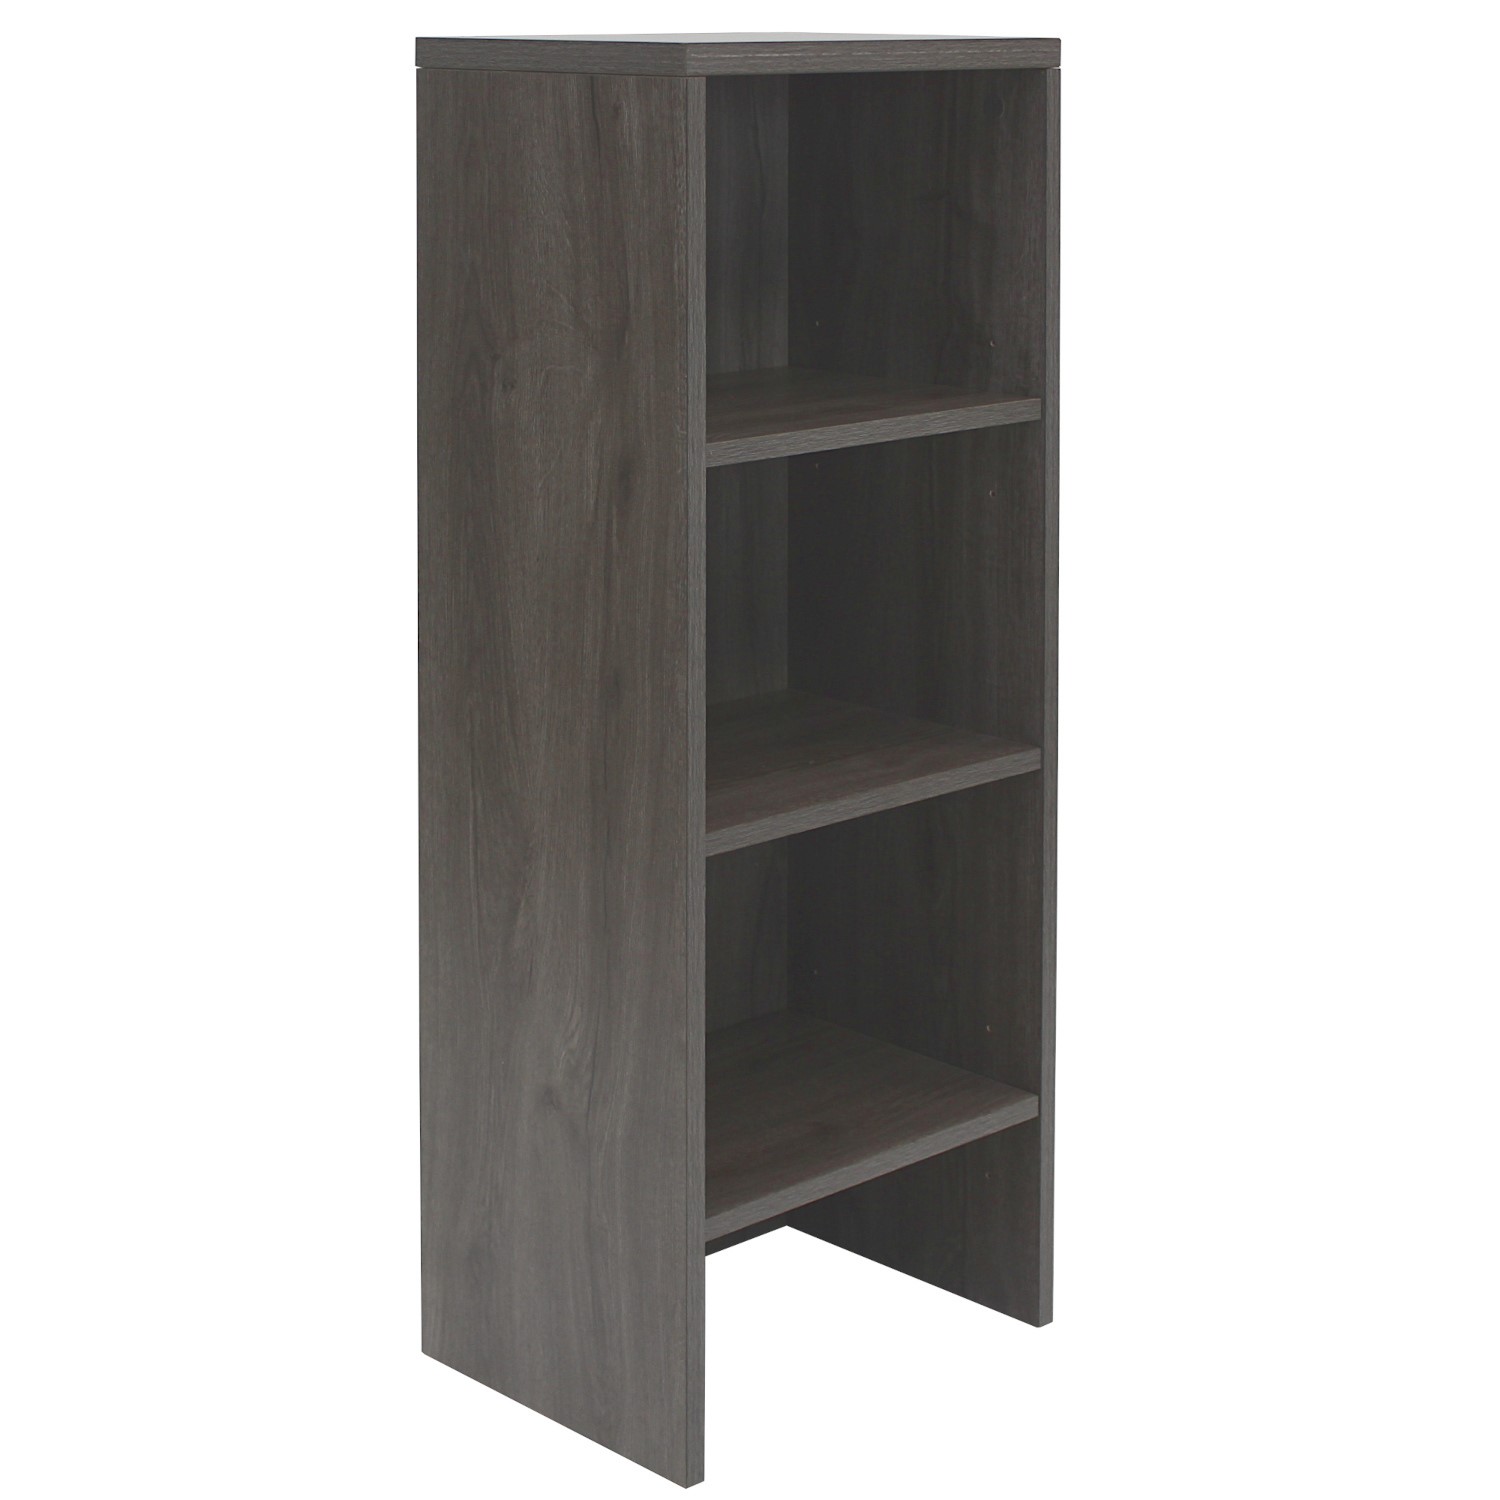 Read more about Narrow dark grey wall mounted bookcase denver